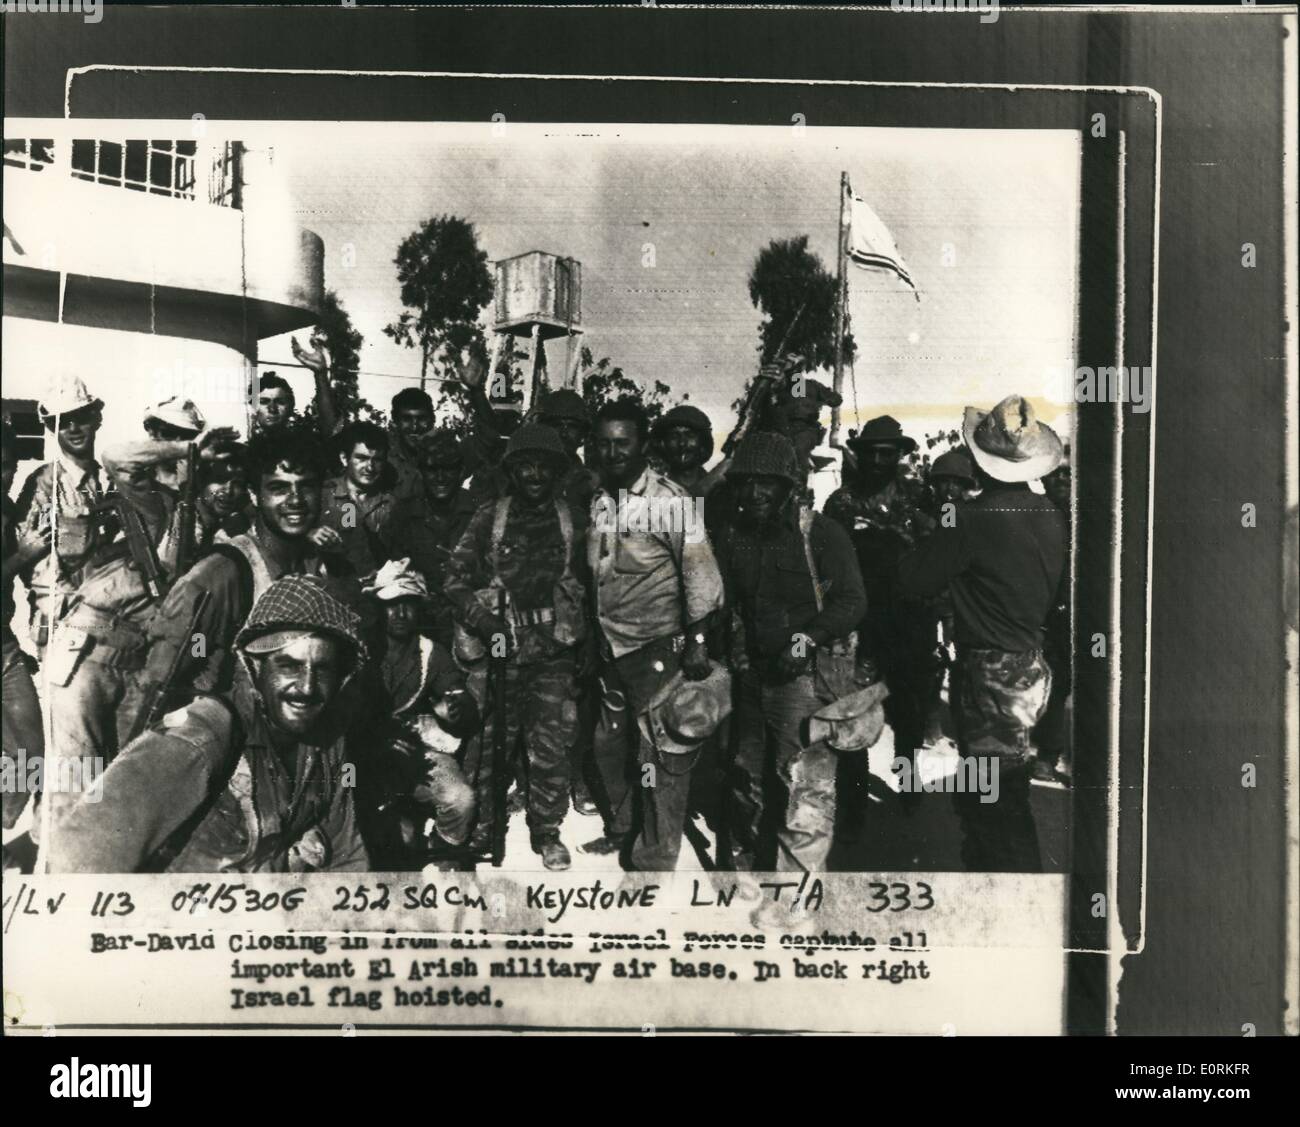 Jan 1, 1960 - Bar -David Closing in from all sides Israel Forces capture all important El Arish military air base. In back right Israel flag hoisted. Stock Photo